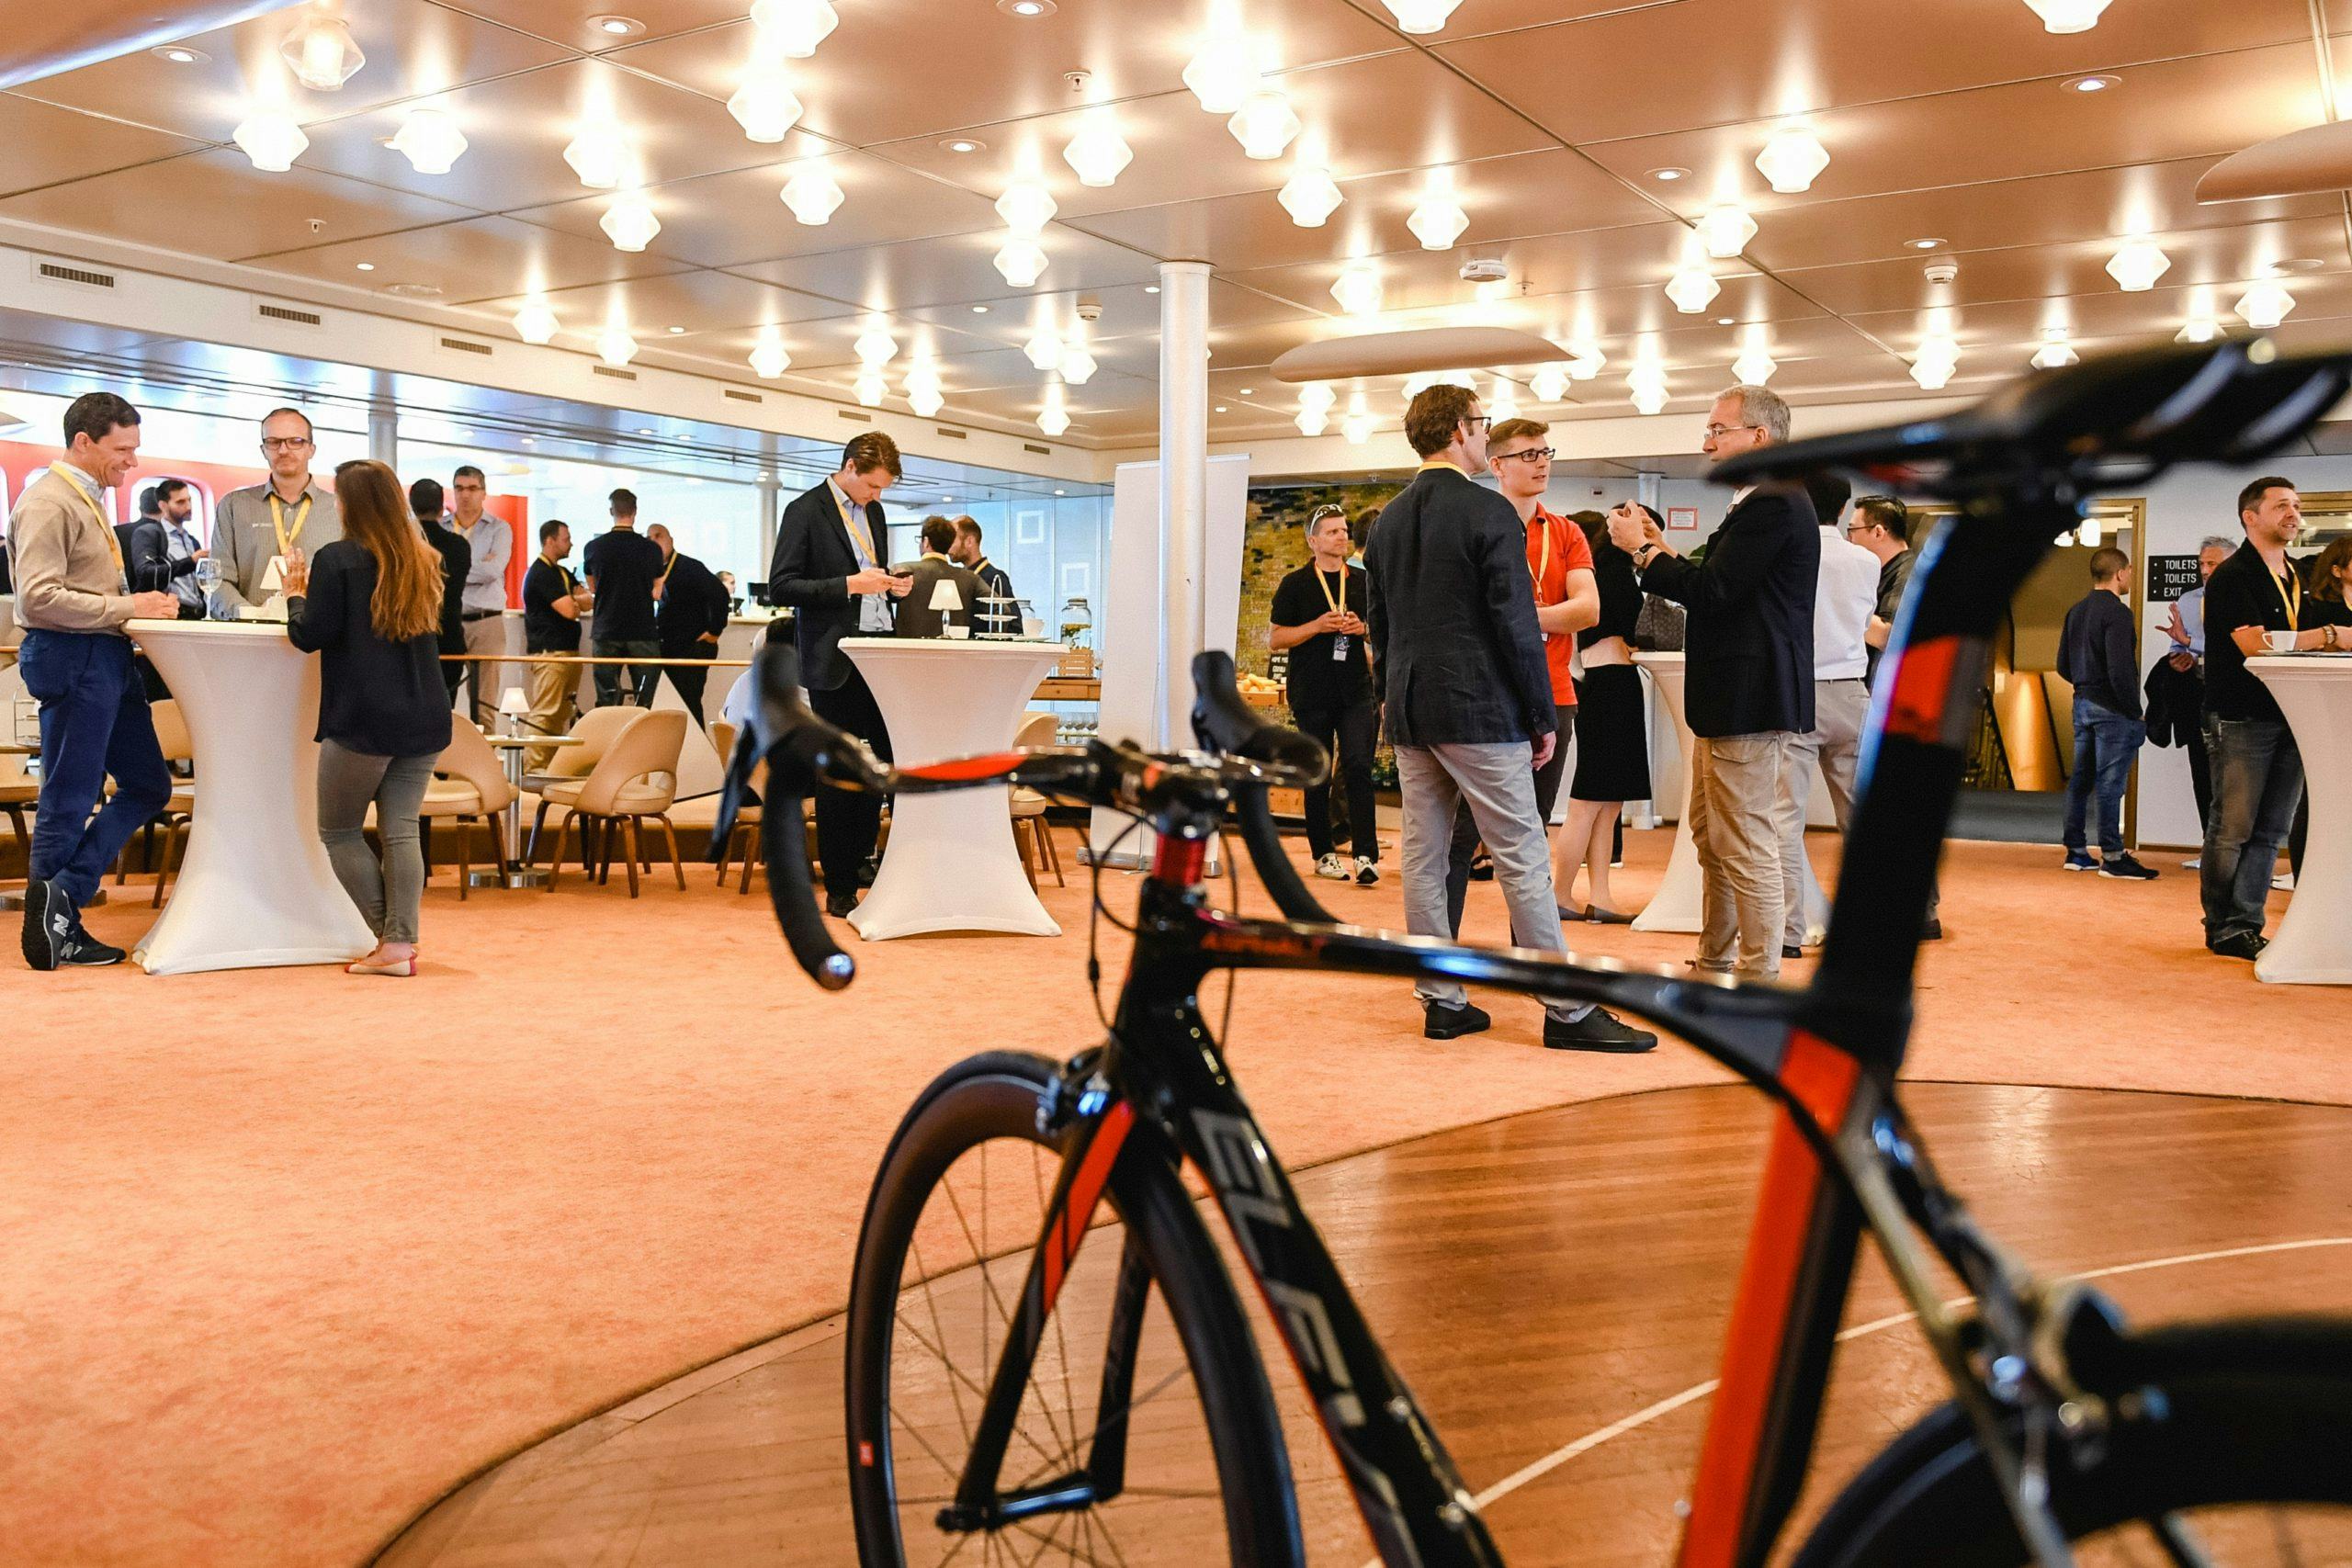 The busy agenda of the World Cycling Forum 2021 includes Q&A sessions with the speakers, panel discussions as well as ample networking opportunities during the breaks. - Photo WFSI